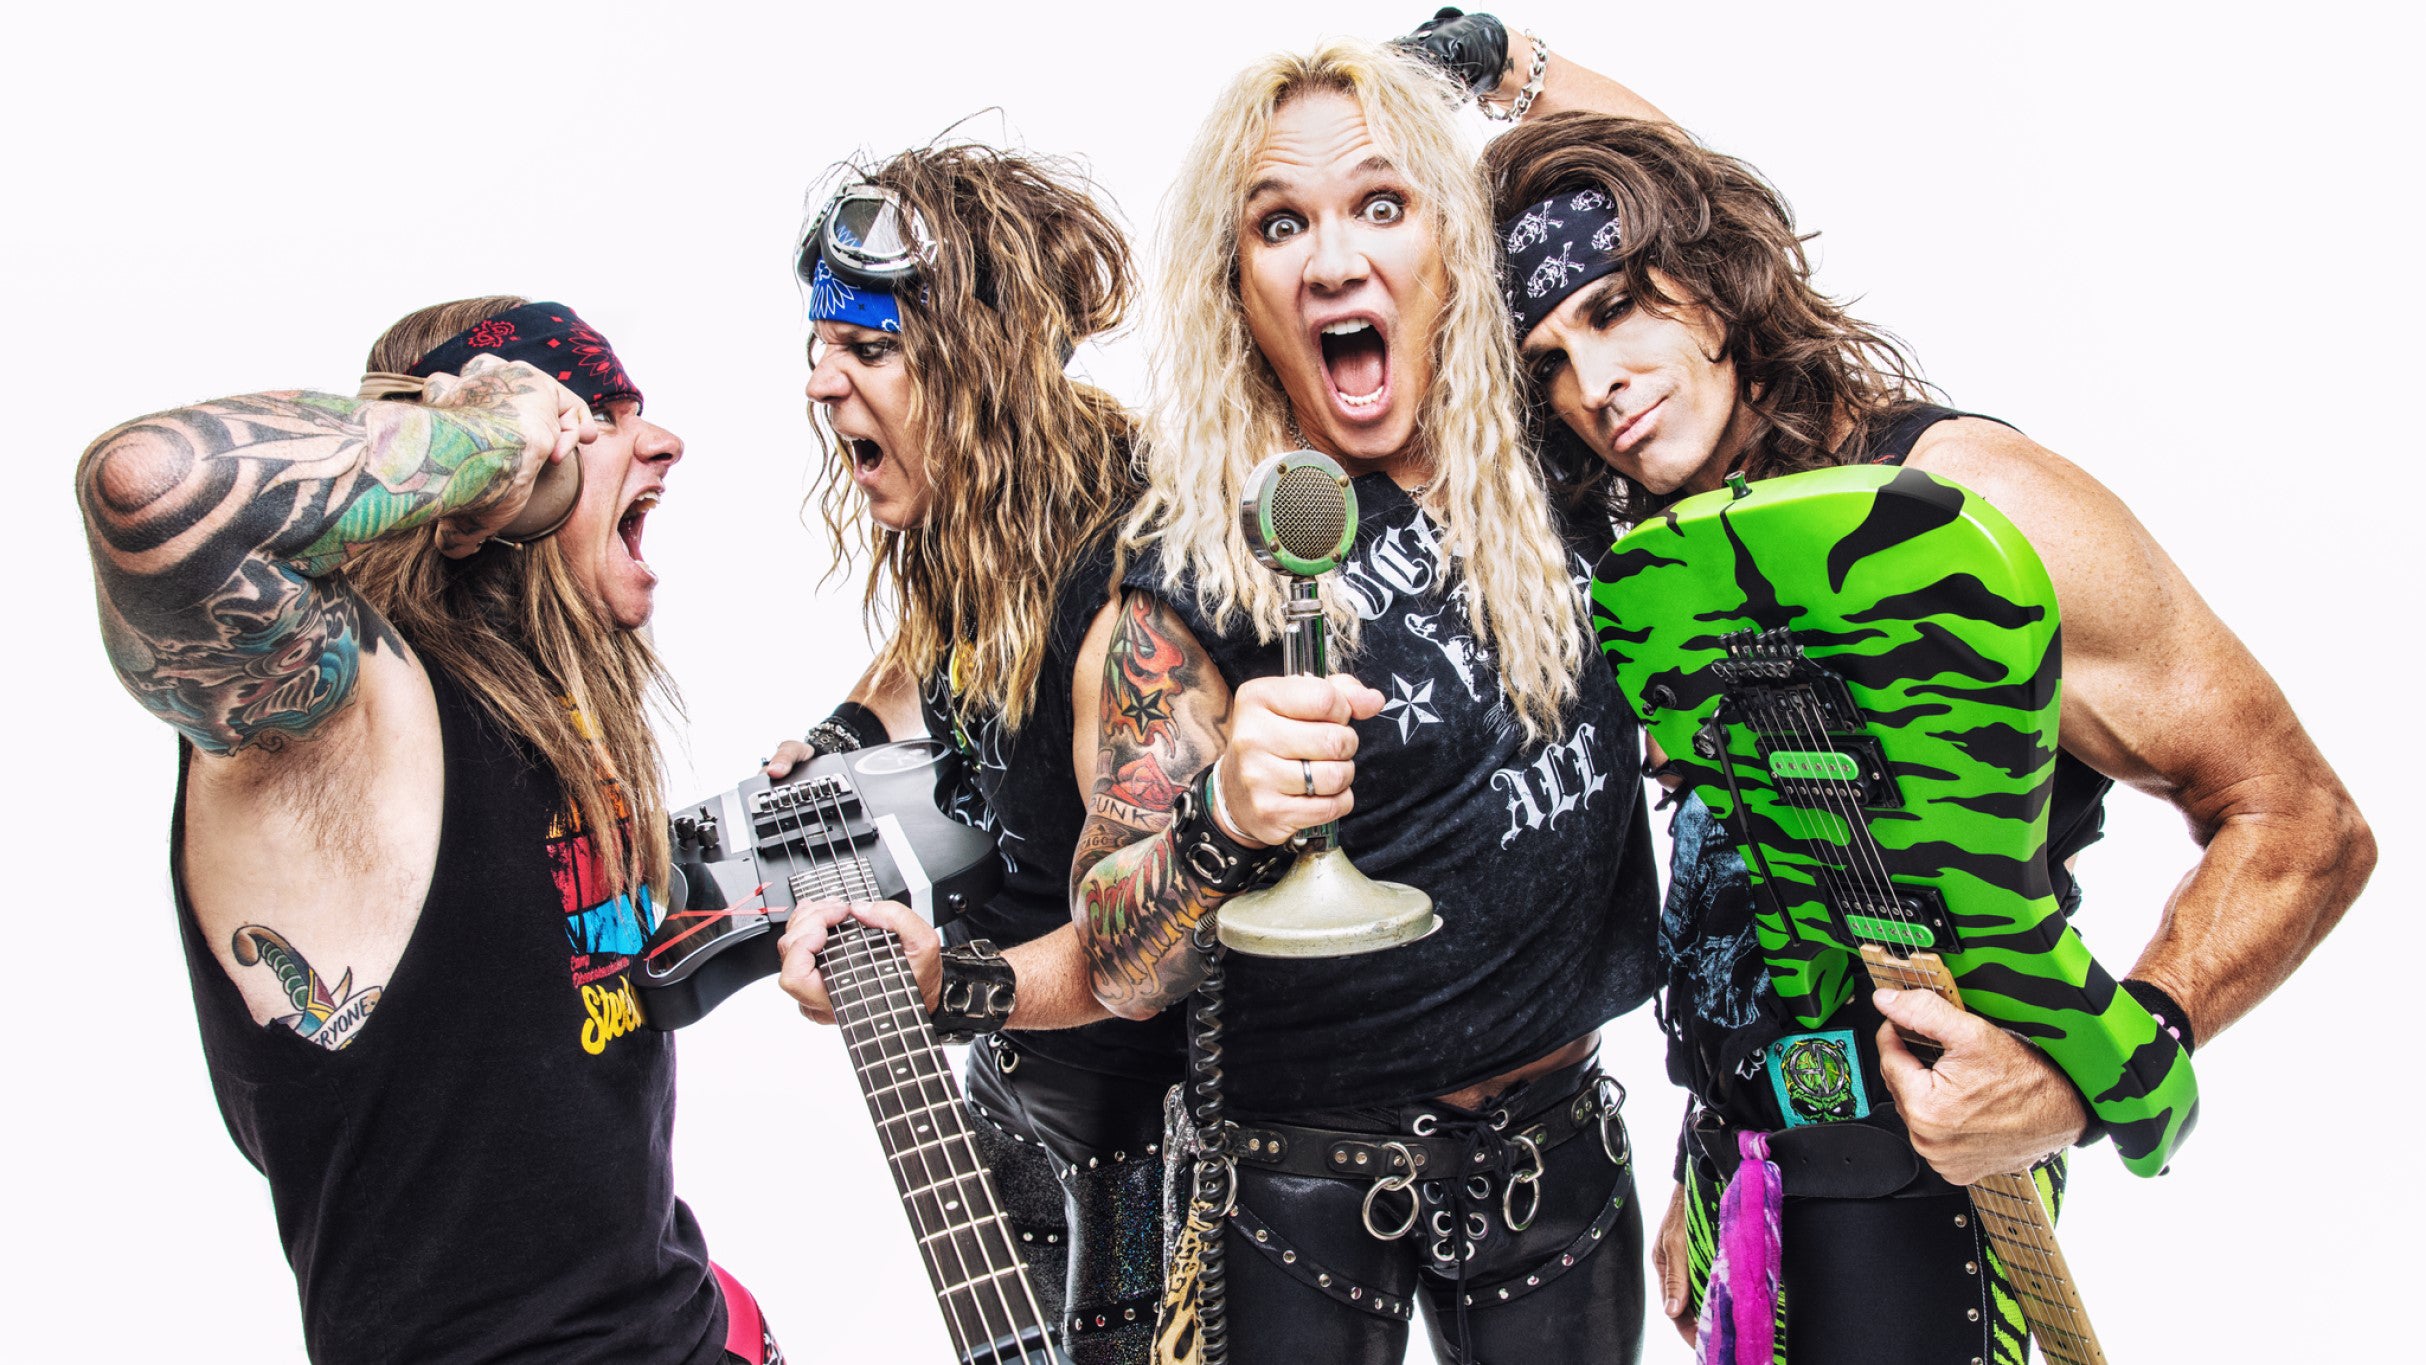 Steel Panther - On The Prowl World Tour in Montreal promo photo for Prévente Artiste presale offer code